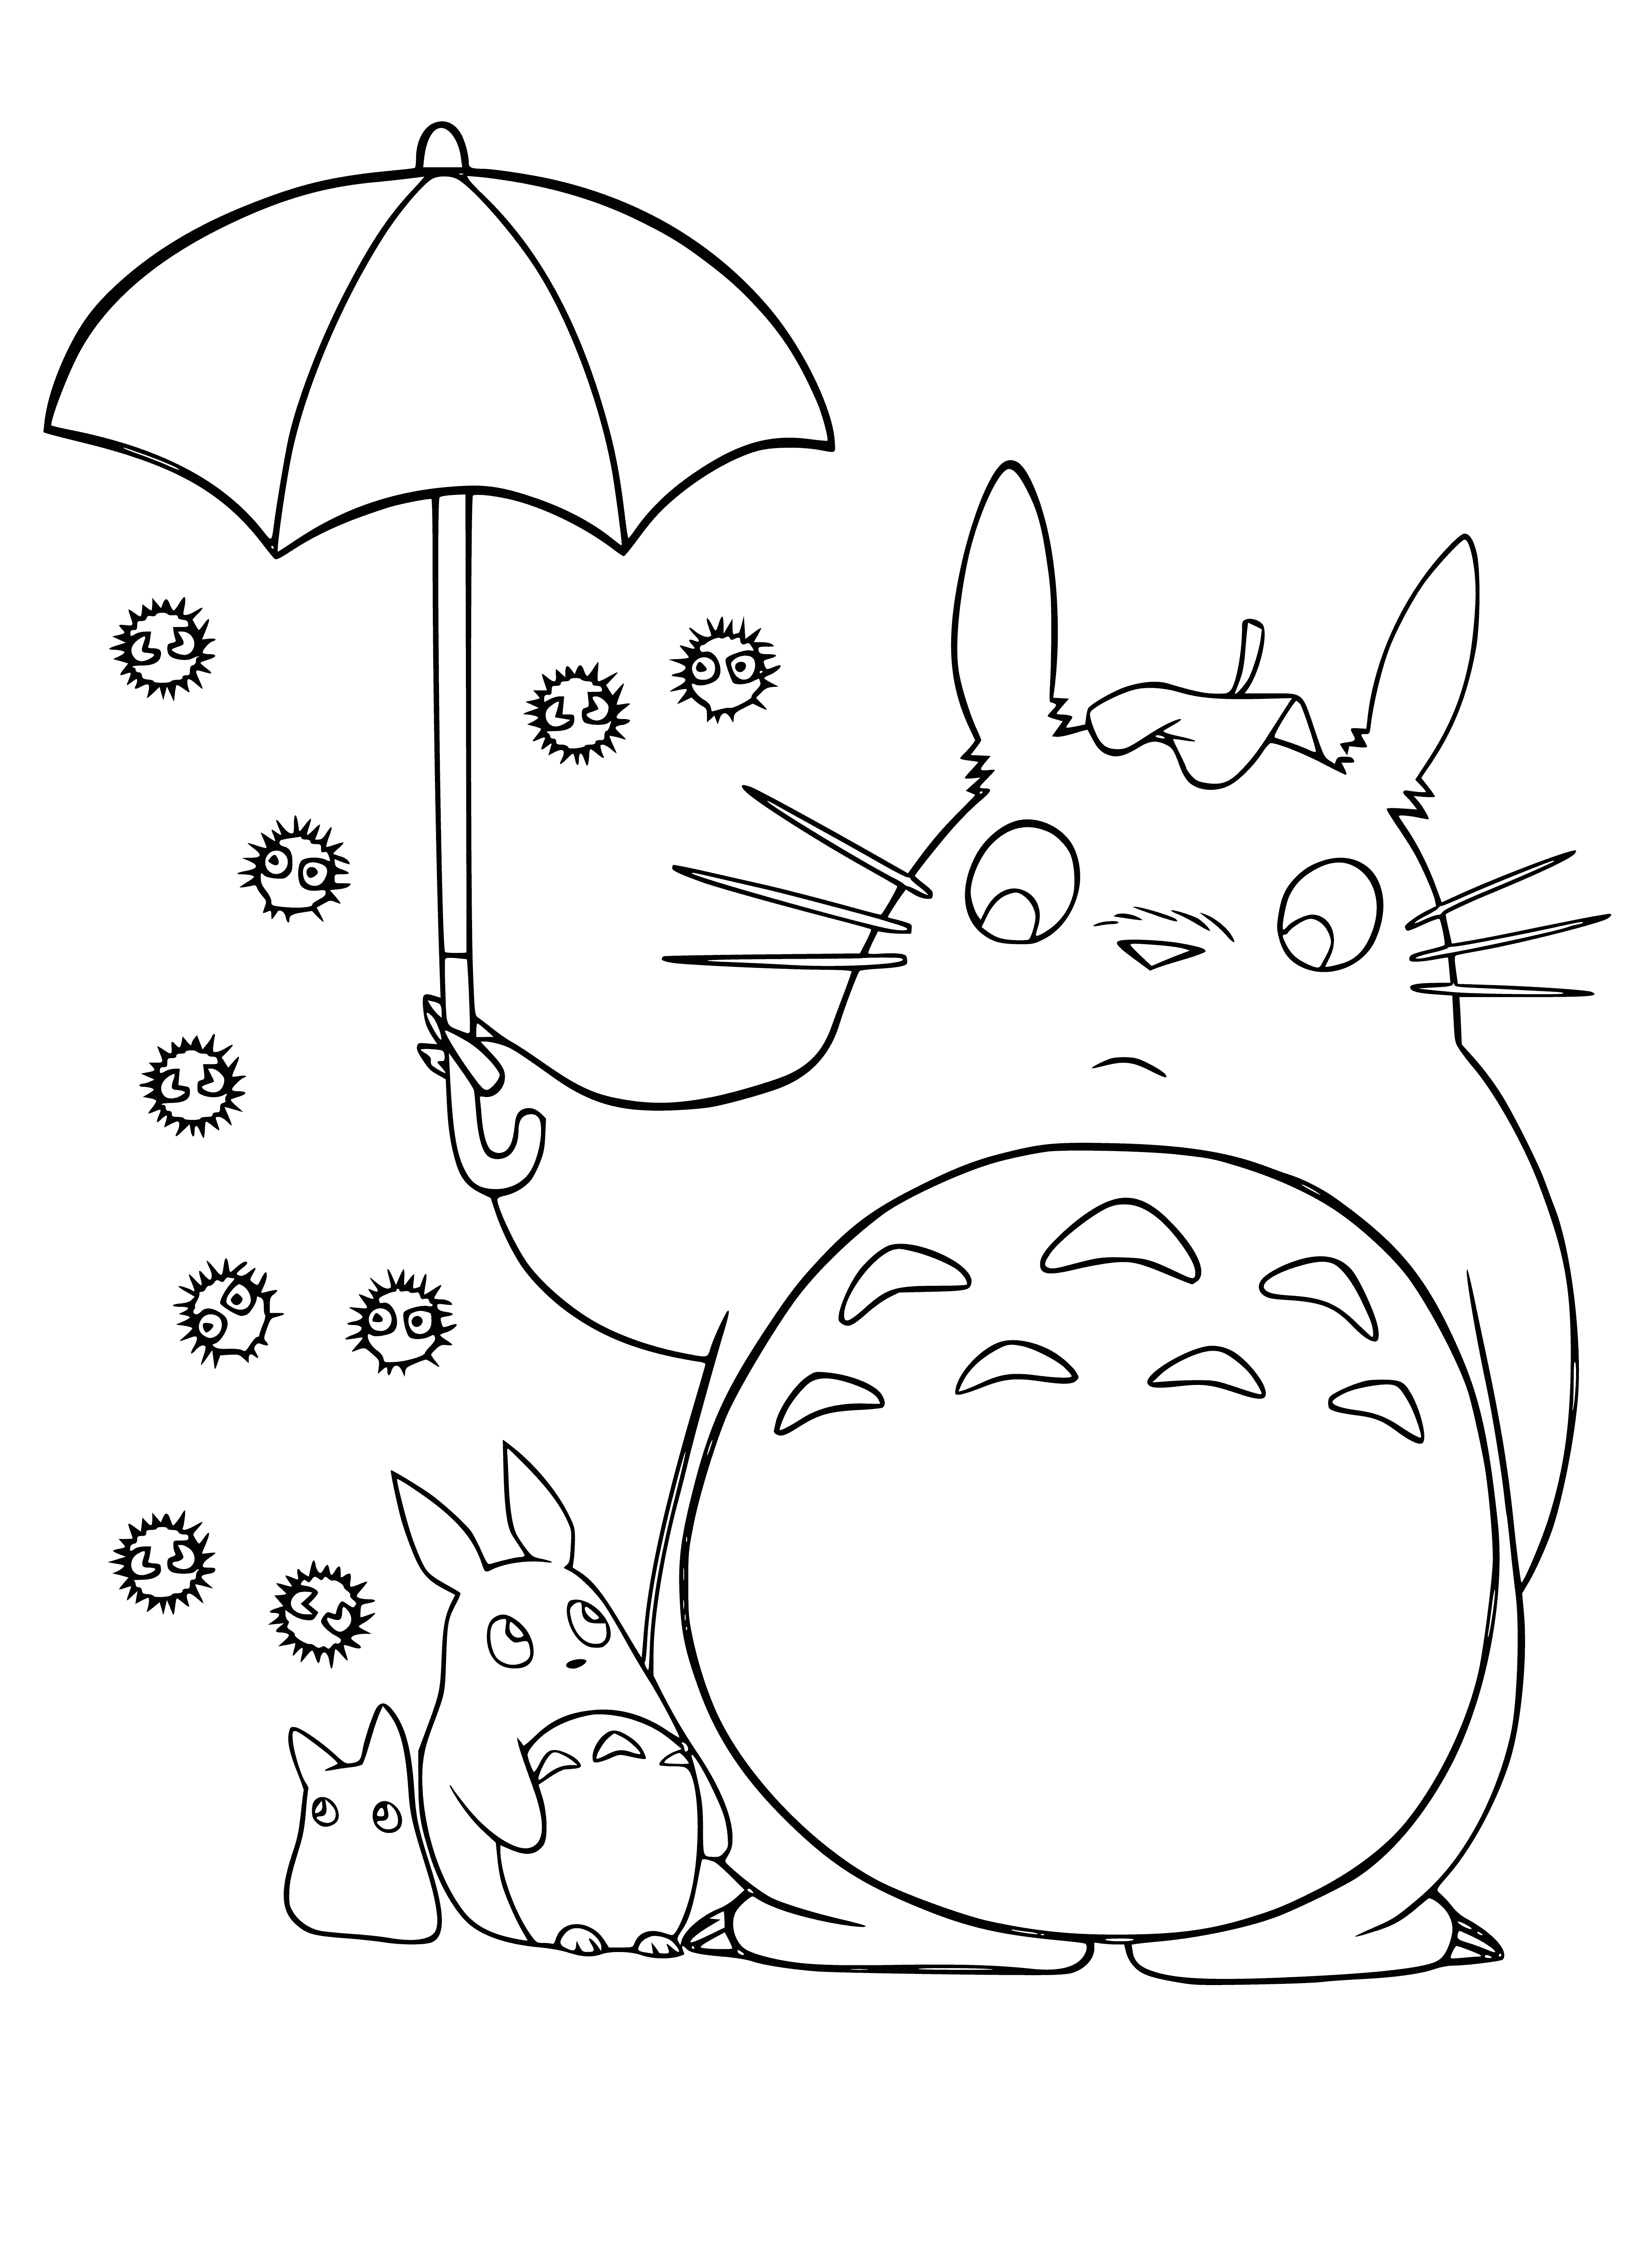 coloring page: Two cute creatures: Totoro, a big white & fluffy one, & Chernushki, a smaller dark-furred one, perched on its head, who looks mischievous. Totoro looks content.